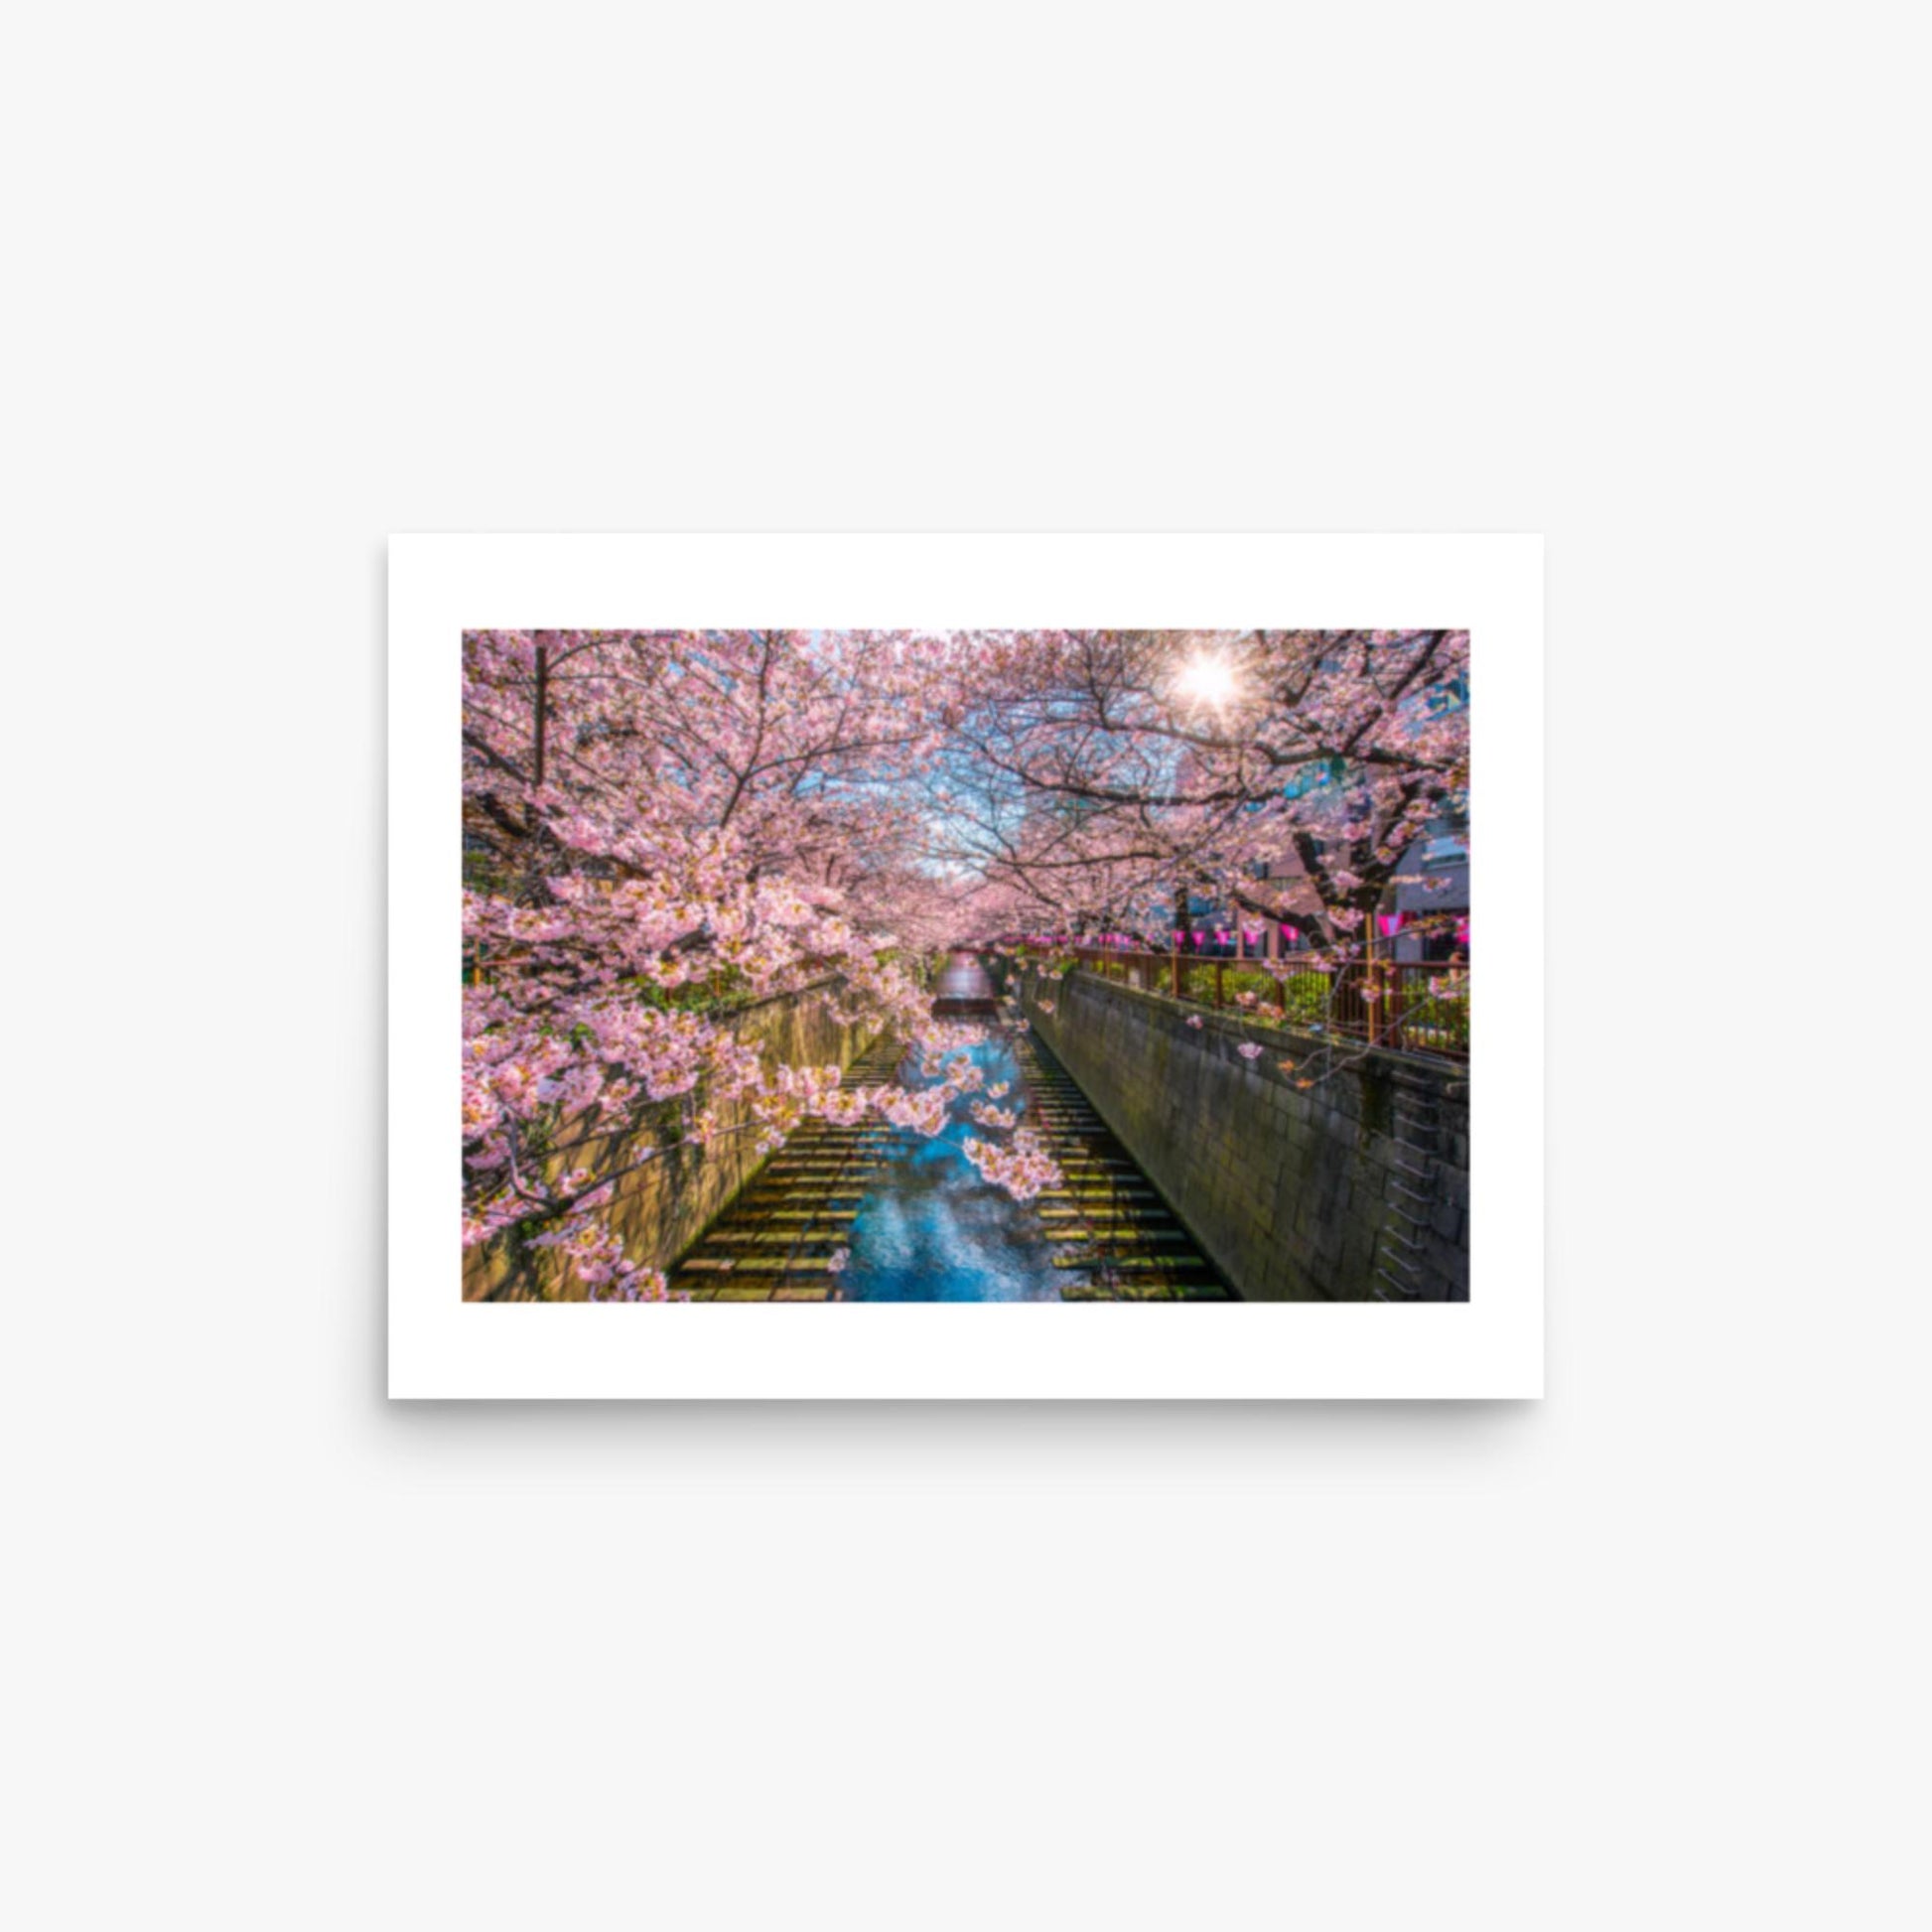 Cherry blossom sakura lined Meguro Canal in Tokyo 12x16 in Poster